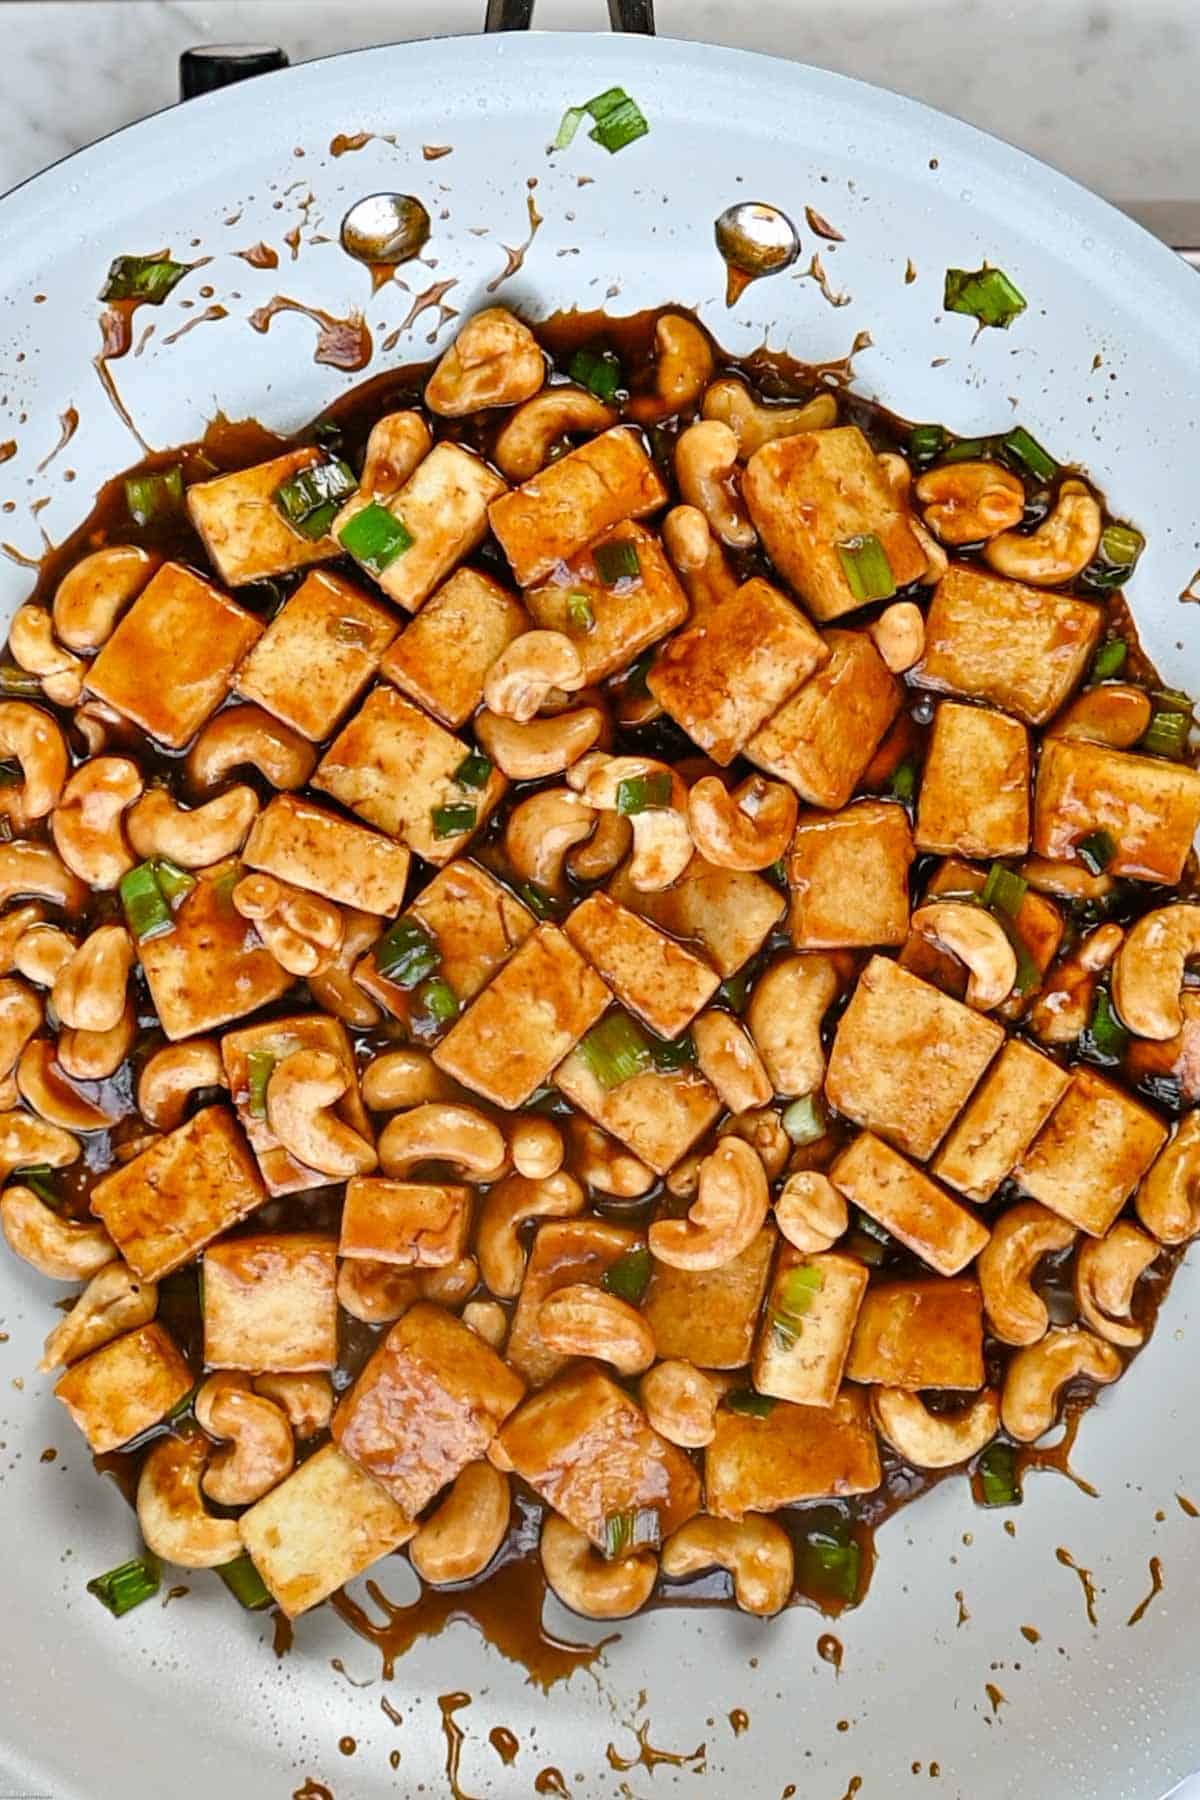 Tofu, green onions, cashews, and sauce in a large skillet.